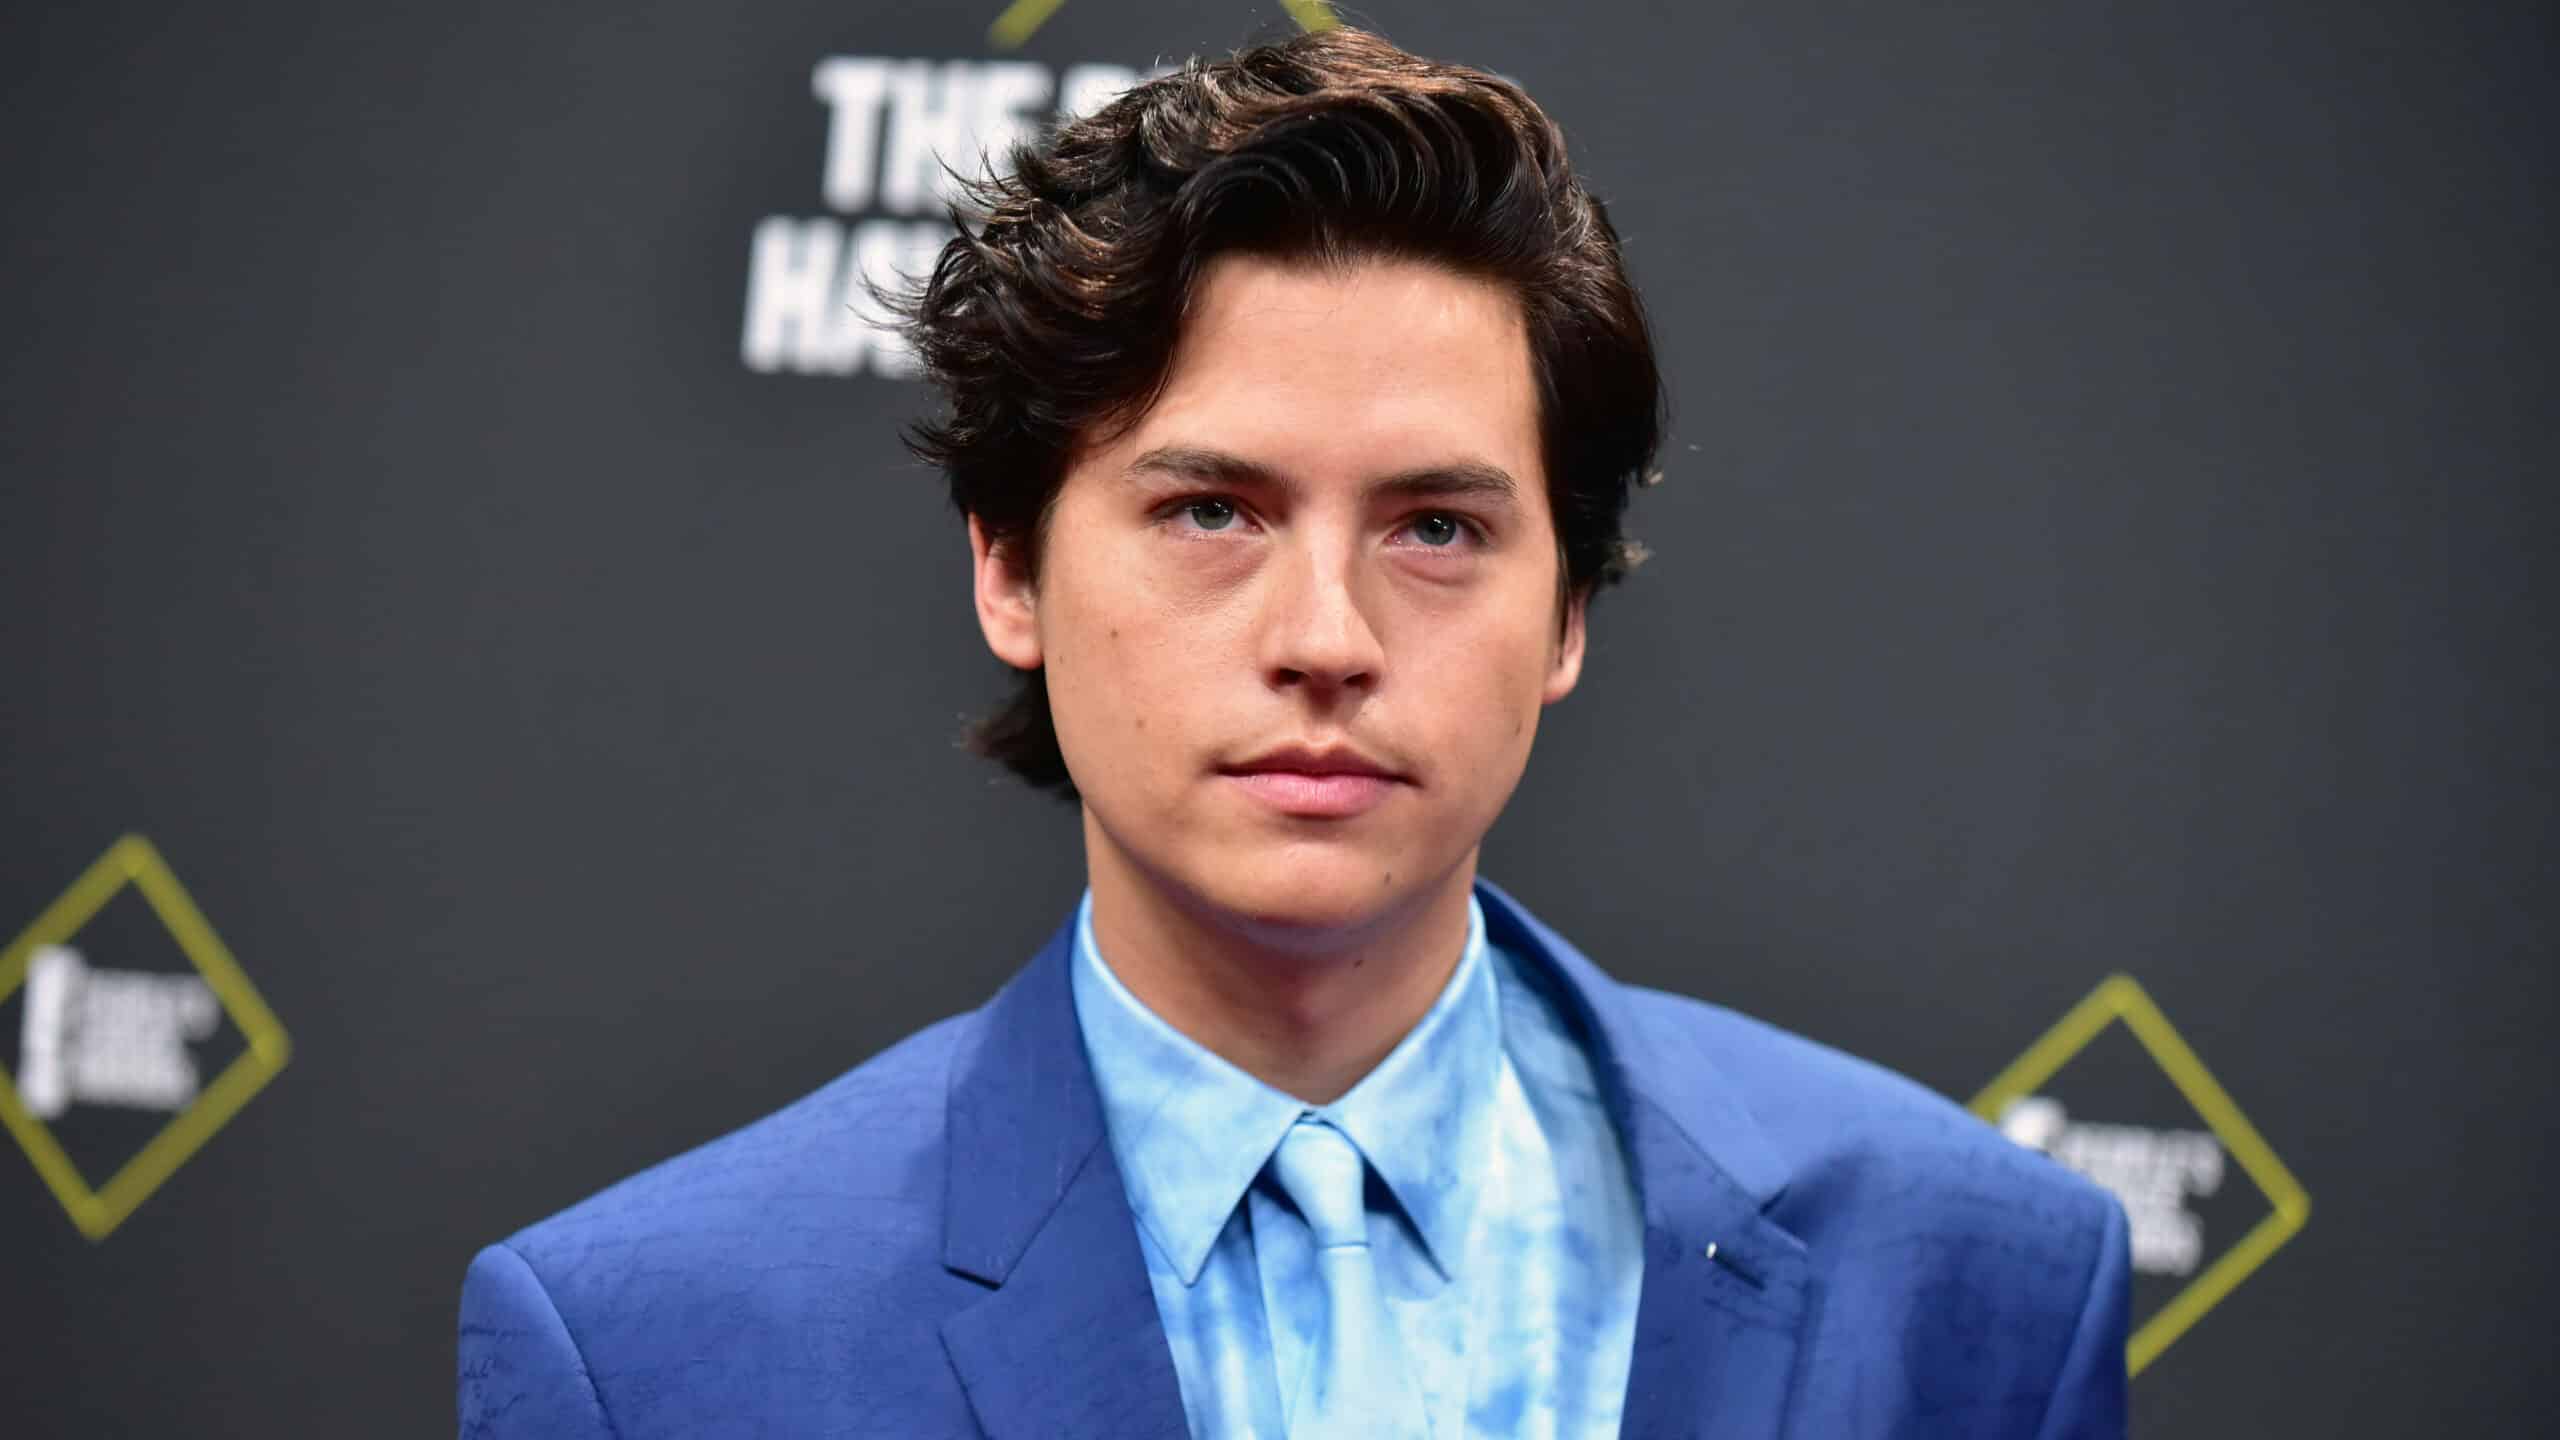 Cole Sprouse attends the 2019 E! People's Choice Awards at Barker Hangar on November 10, 2019 in Santa Monica, California.